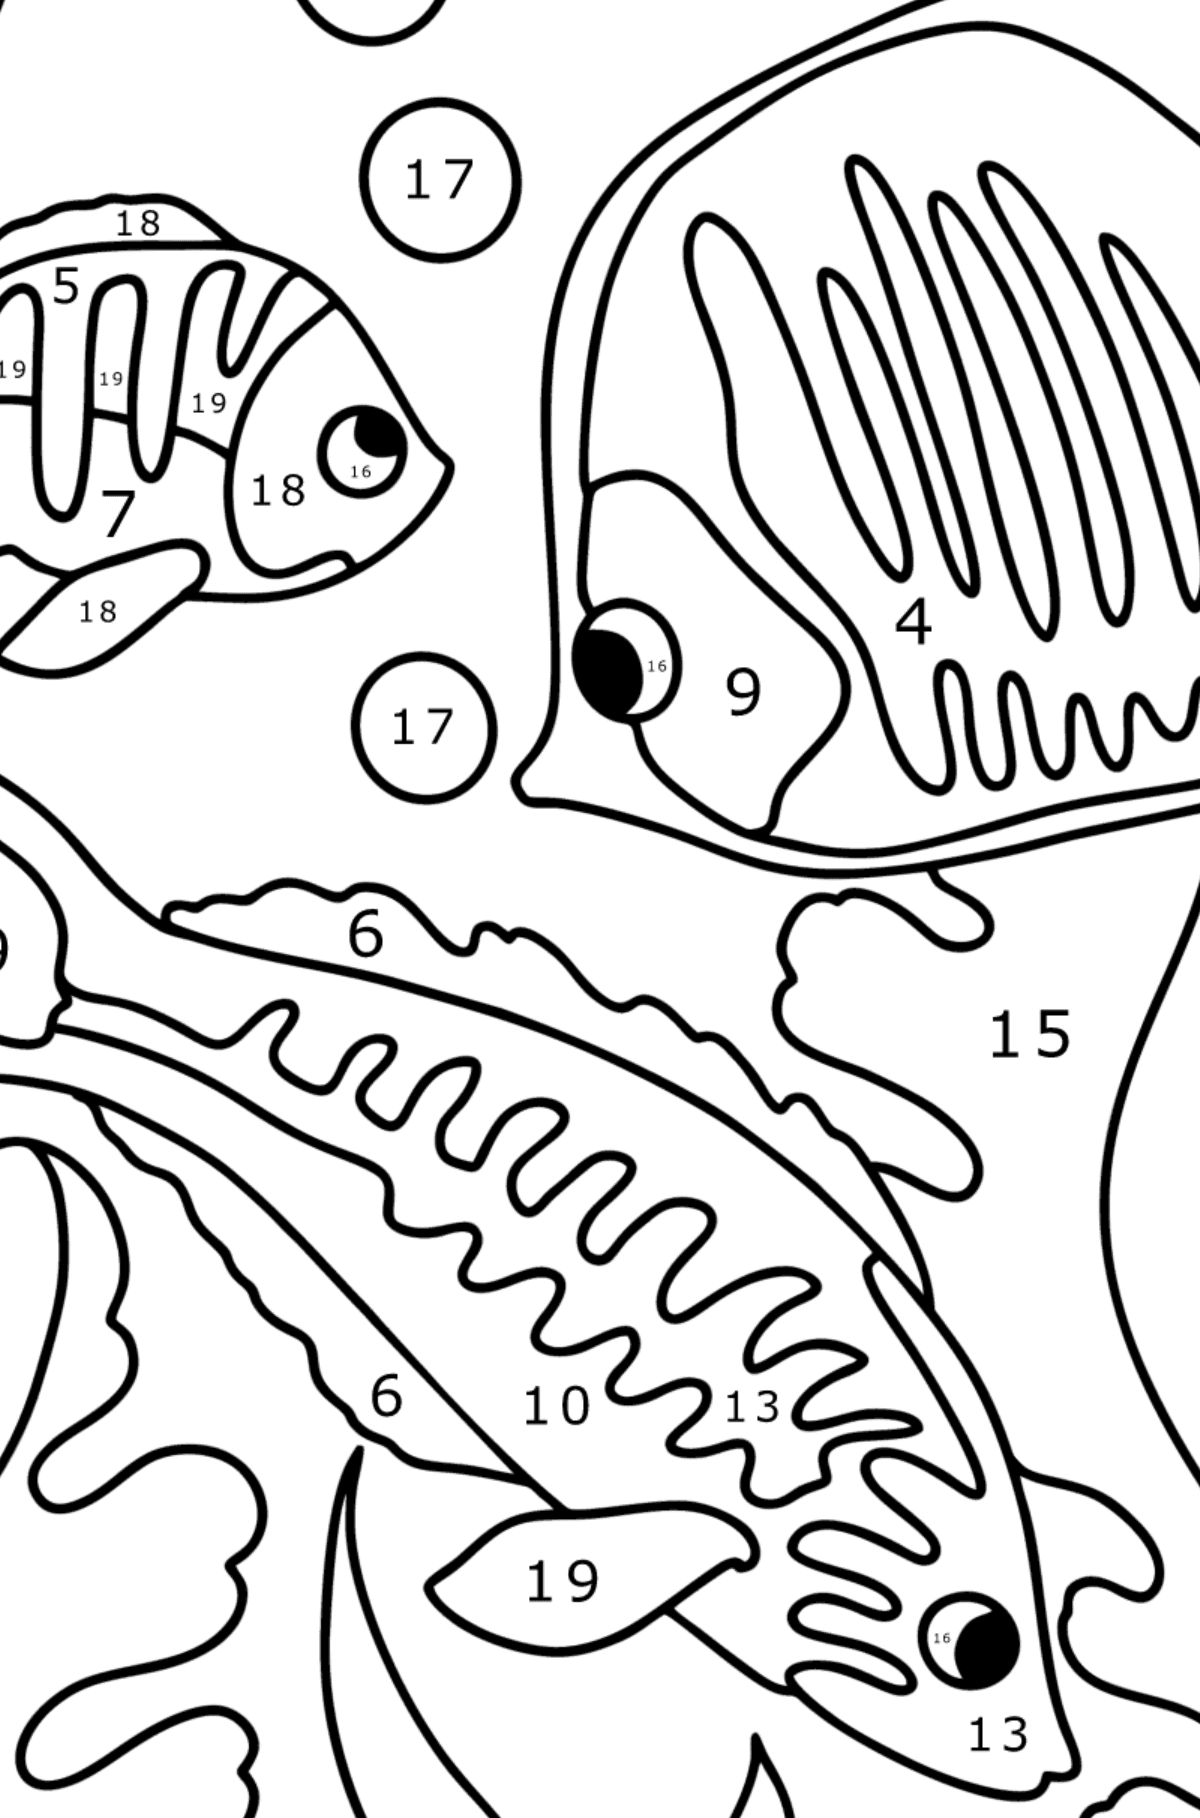 Fish in the sea coloring page - Coloring by Numbers for Kids